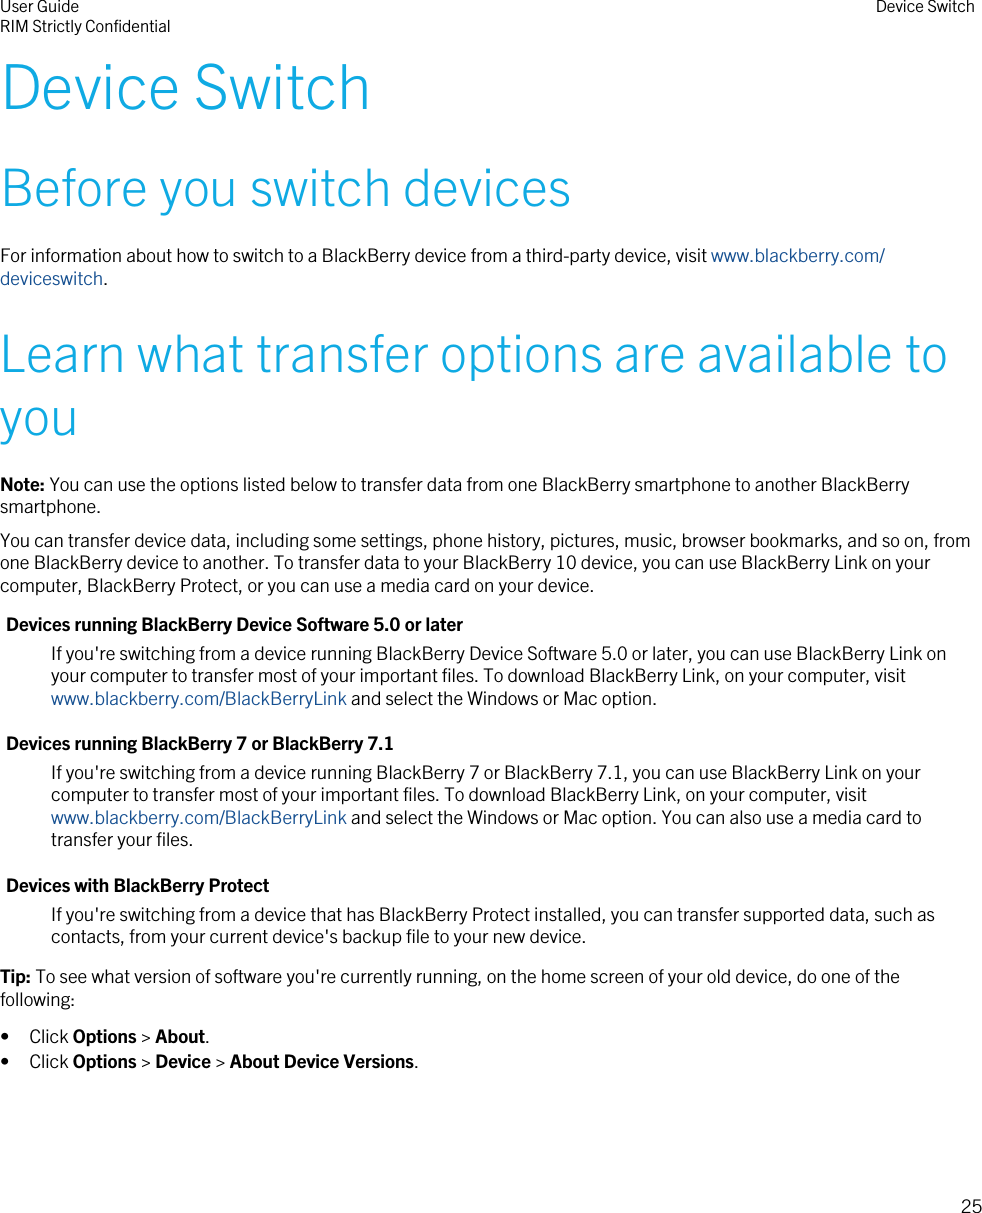 Device SwitchBefore you switch devicesFor information about how to switch to a BlackBerry device from a third-party device, visit www.blackberry.com/deviceswitch.Learn what transfer options are available toyouNote: You can use the options listed below to transfer data from one BlackBerry smartphone to another BlackBerrysmartphone.You can transfer device data, including some settings, phone history, pictures, music, browser bookmarks, and so on, fromone BlackBerry device to another. To transfer data to your BlackBerry 10 device, you can use BlackBerry Link on yourcomputer, BlackBerry Protect, or you can use a media card on your device.Devices running BlackBerry Device Software 5.0 or laterIf you&apos;re switching from a device running BlackBerry Device Software 5.0 or later, you can use BlackBerry Link onyour computer to transfer most of your important files. To download BlackBerry Link, on your computer, visit www.blackberry.com/BlackBerryLink and select the Windows or Mac option.Devices running BlackBerry 7 or BlackBerry 7.1If you&apos;re switching from a device running BlackBerry 7 or BlackBerry 7.1, you can use BlackBerry Link on yourcomputer to transfer most of your important files. To download BlackBerry Link, on your computer, visit www.blackberry.com/BlackBerryLink and select the Windows or Mac option. You can also use a media card totransfer your files.Devices with BlackBerry ProtectIf you&apos;re switching from a device that has BlackBerry Protect installed, you can transfer supported data, such ascontacts, from your current device&apos;s backup file to your new device.Tip: To see what version of software you&apos;re currently running, on the home screen of your old device, do one of thefollowing:• Click Options &gt; About.• Click Options &gt; Device &gt; About Device Versions.User GuideRIM Strictly Confidential Device Switch25